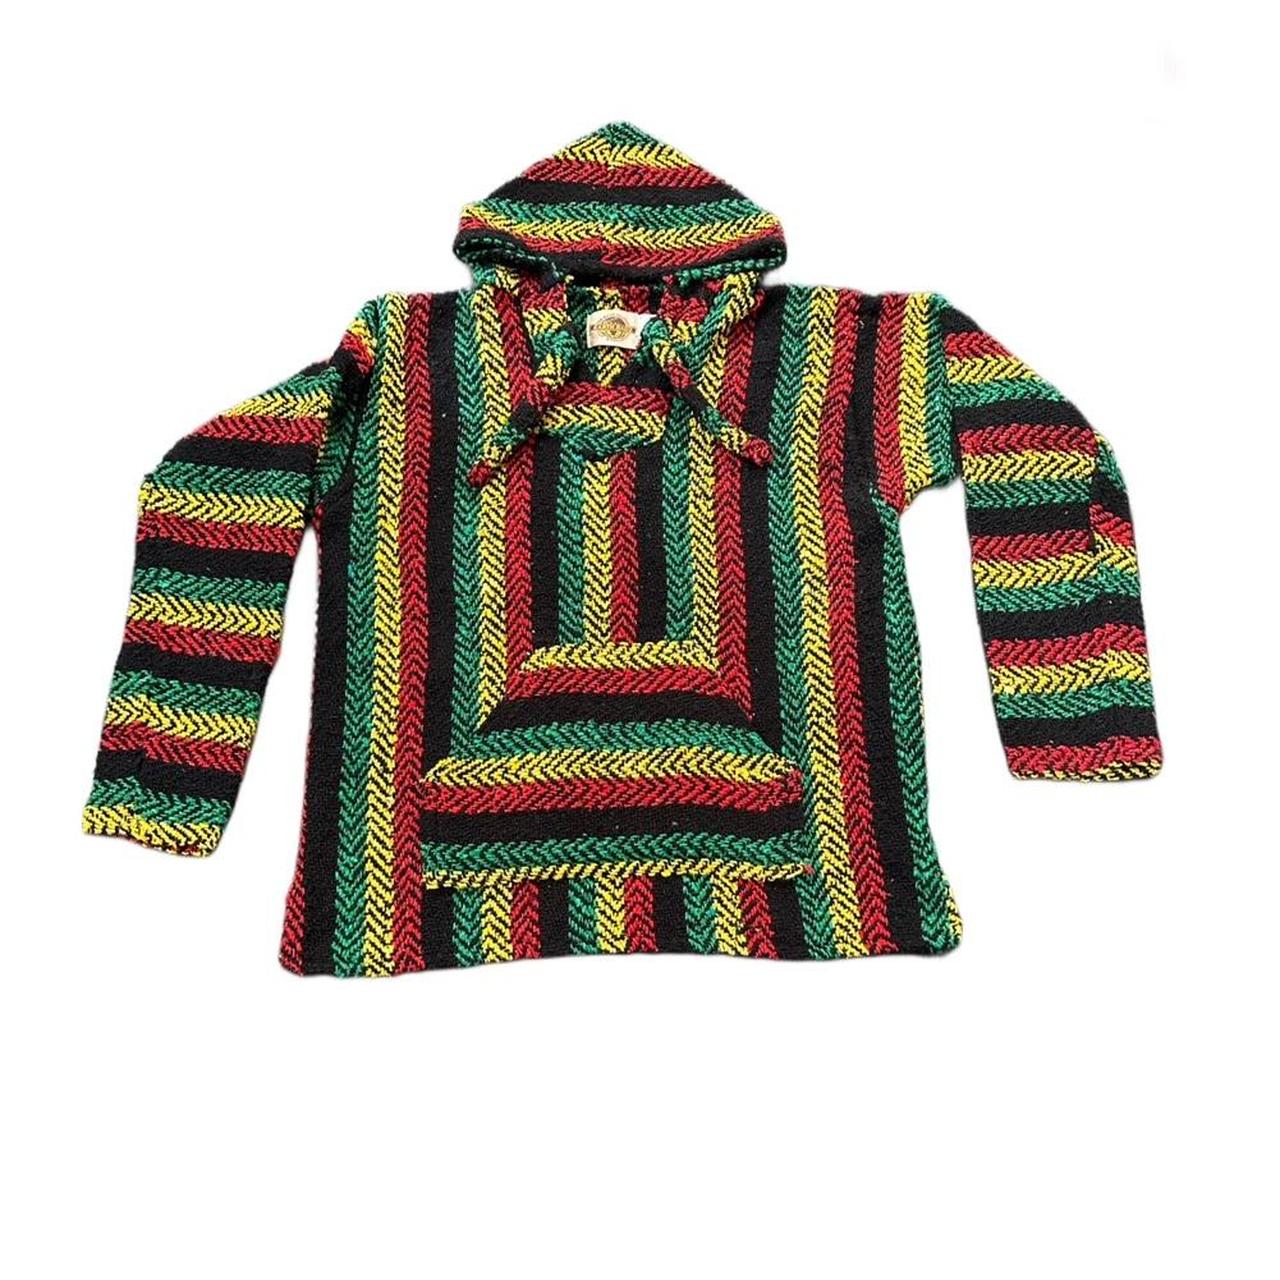 rasta woven hooded jacket tagged size small... - Depop